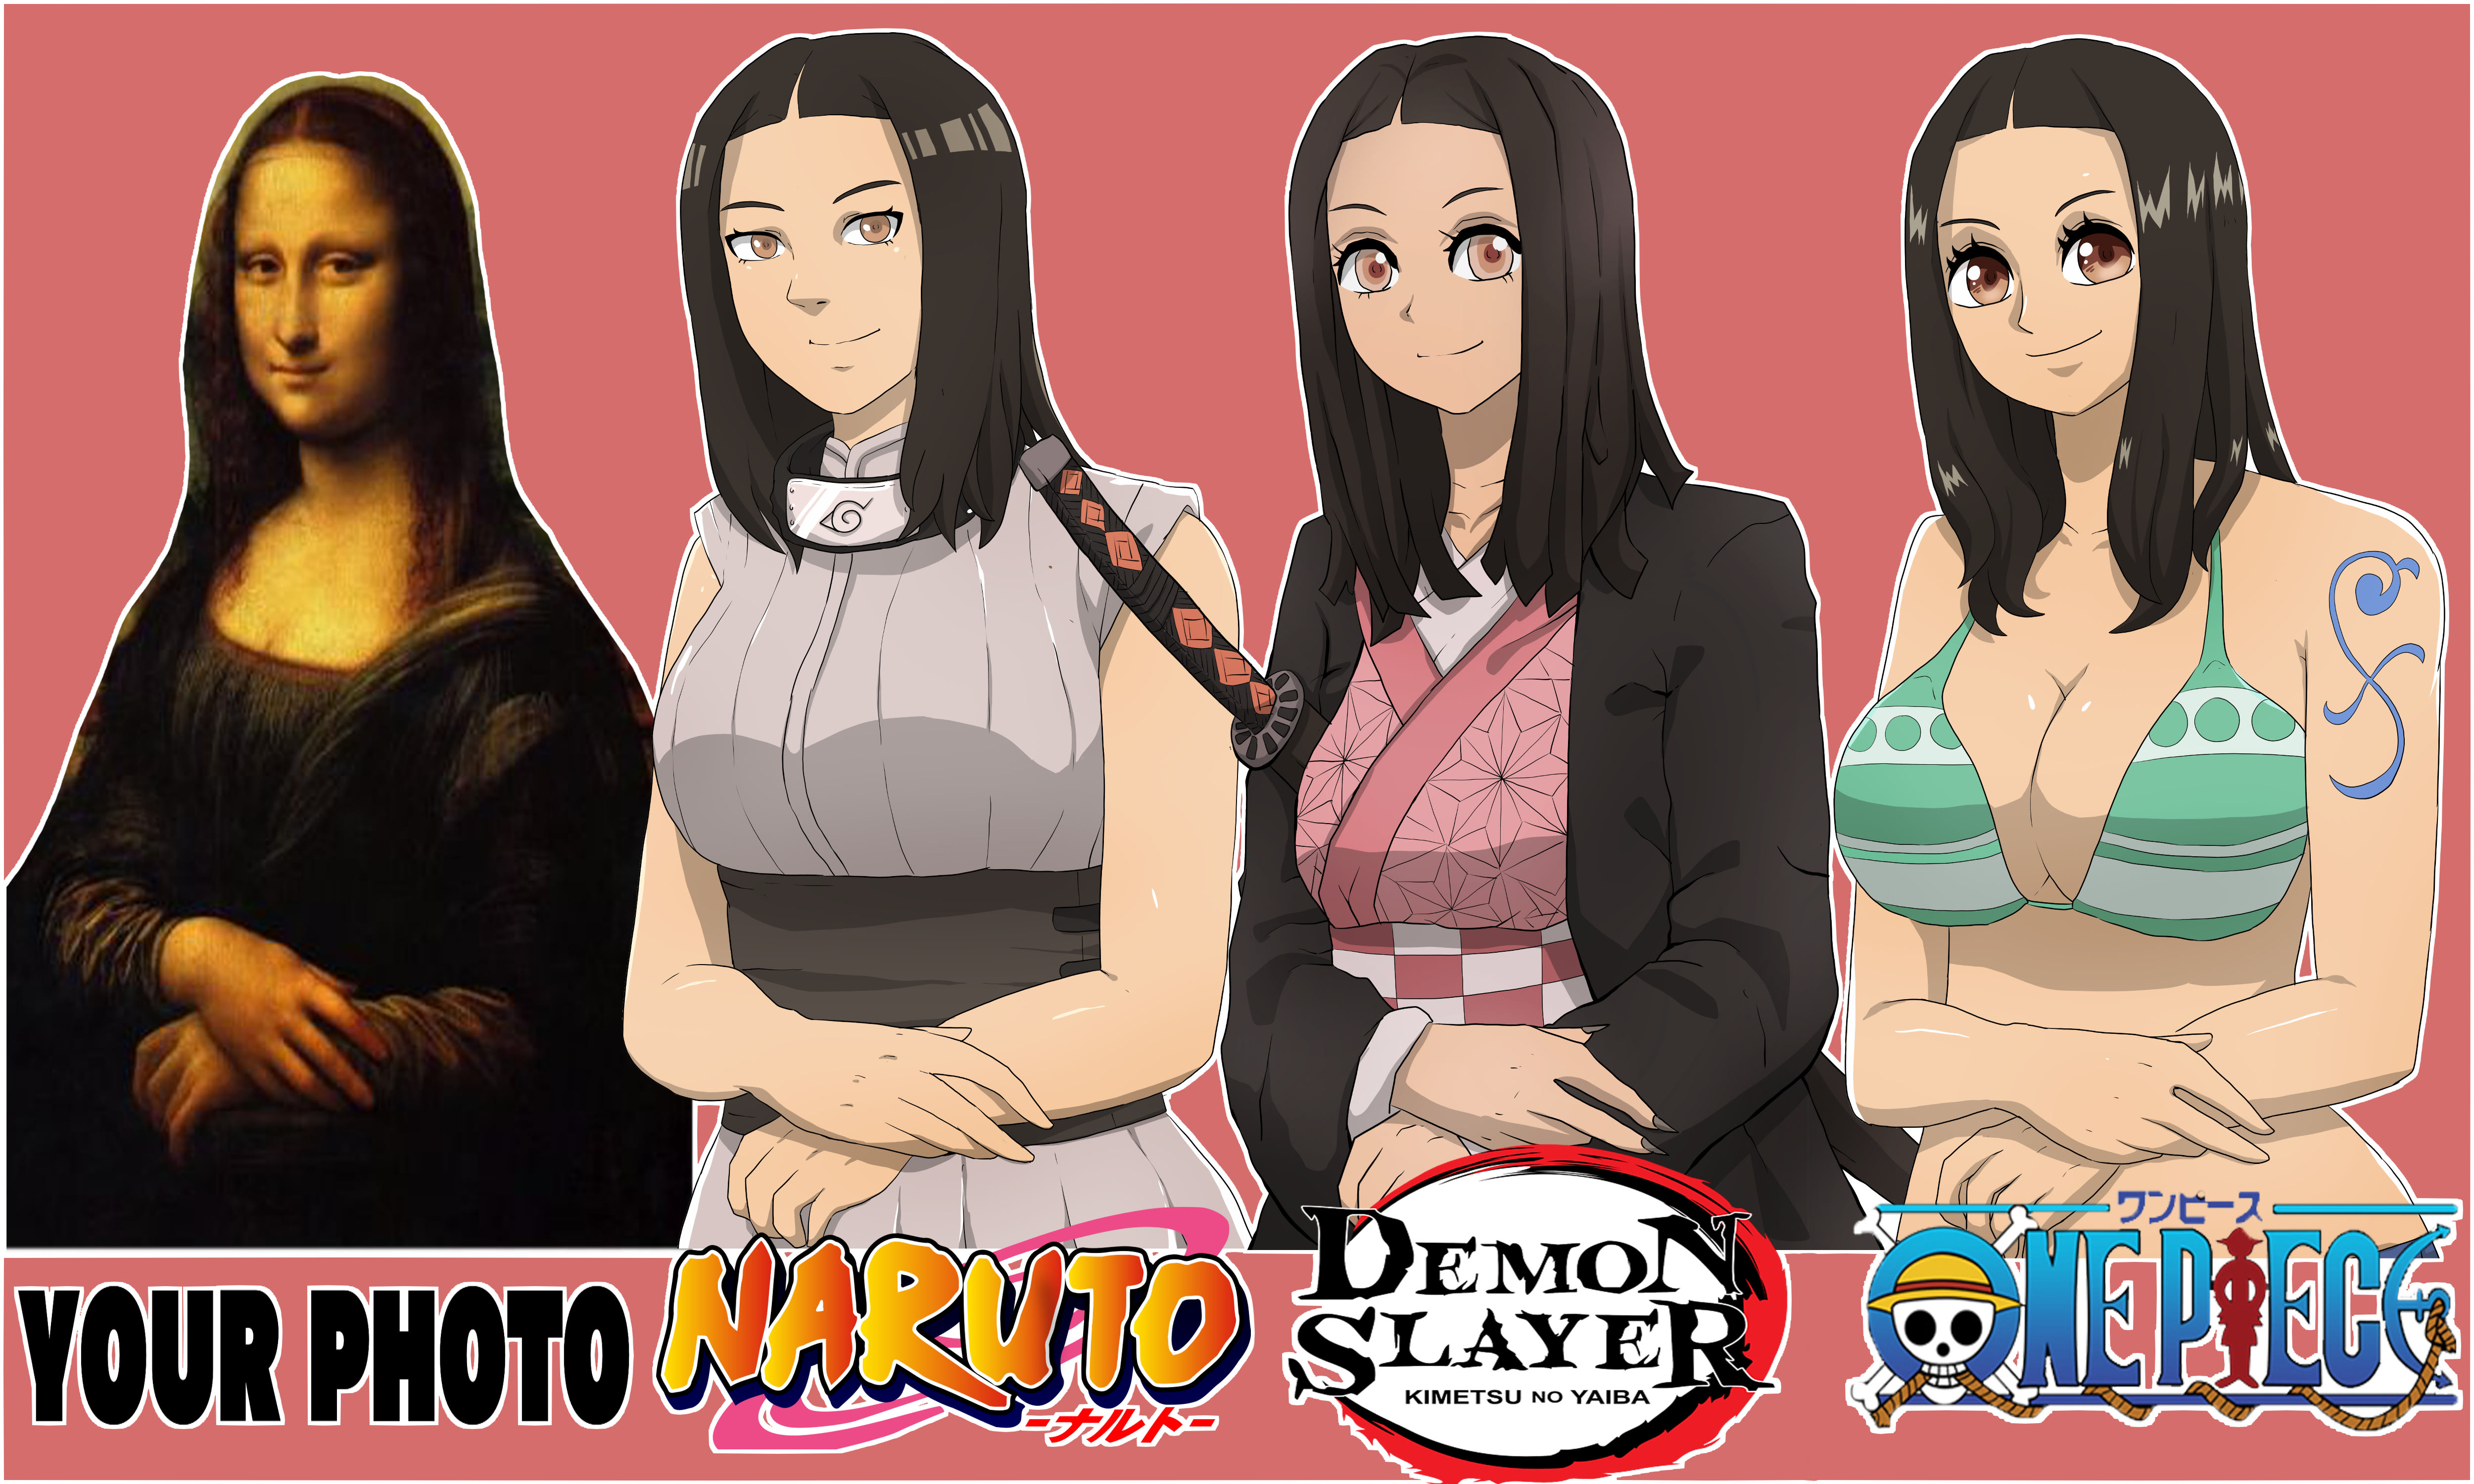 Draw Your Photo In Anime Style Naruto Demon Slayer One Piece And Other By Bapauu Fiverr